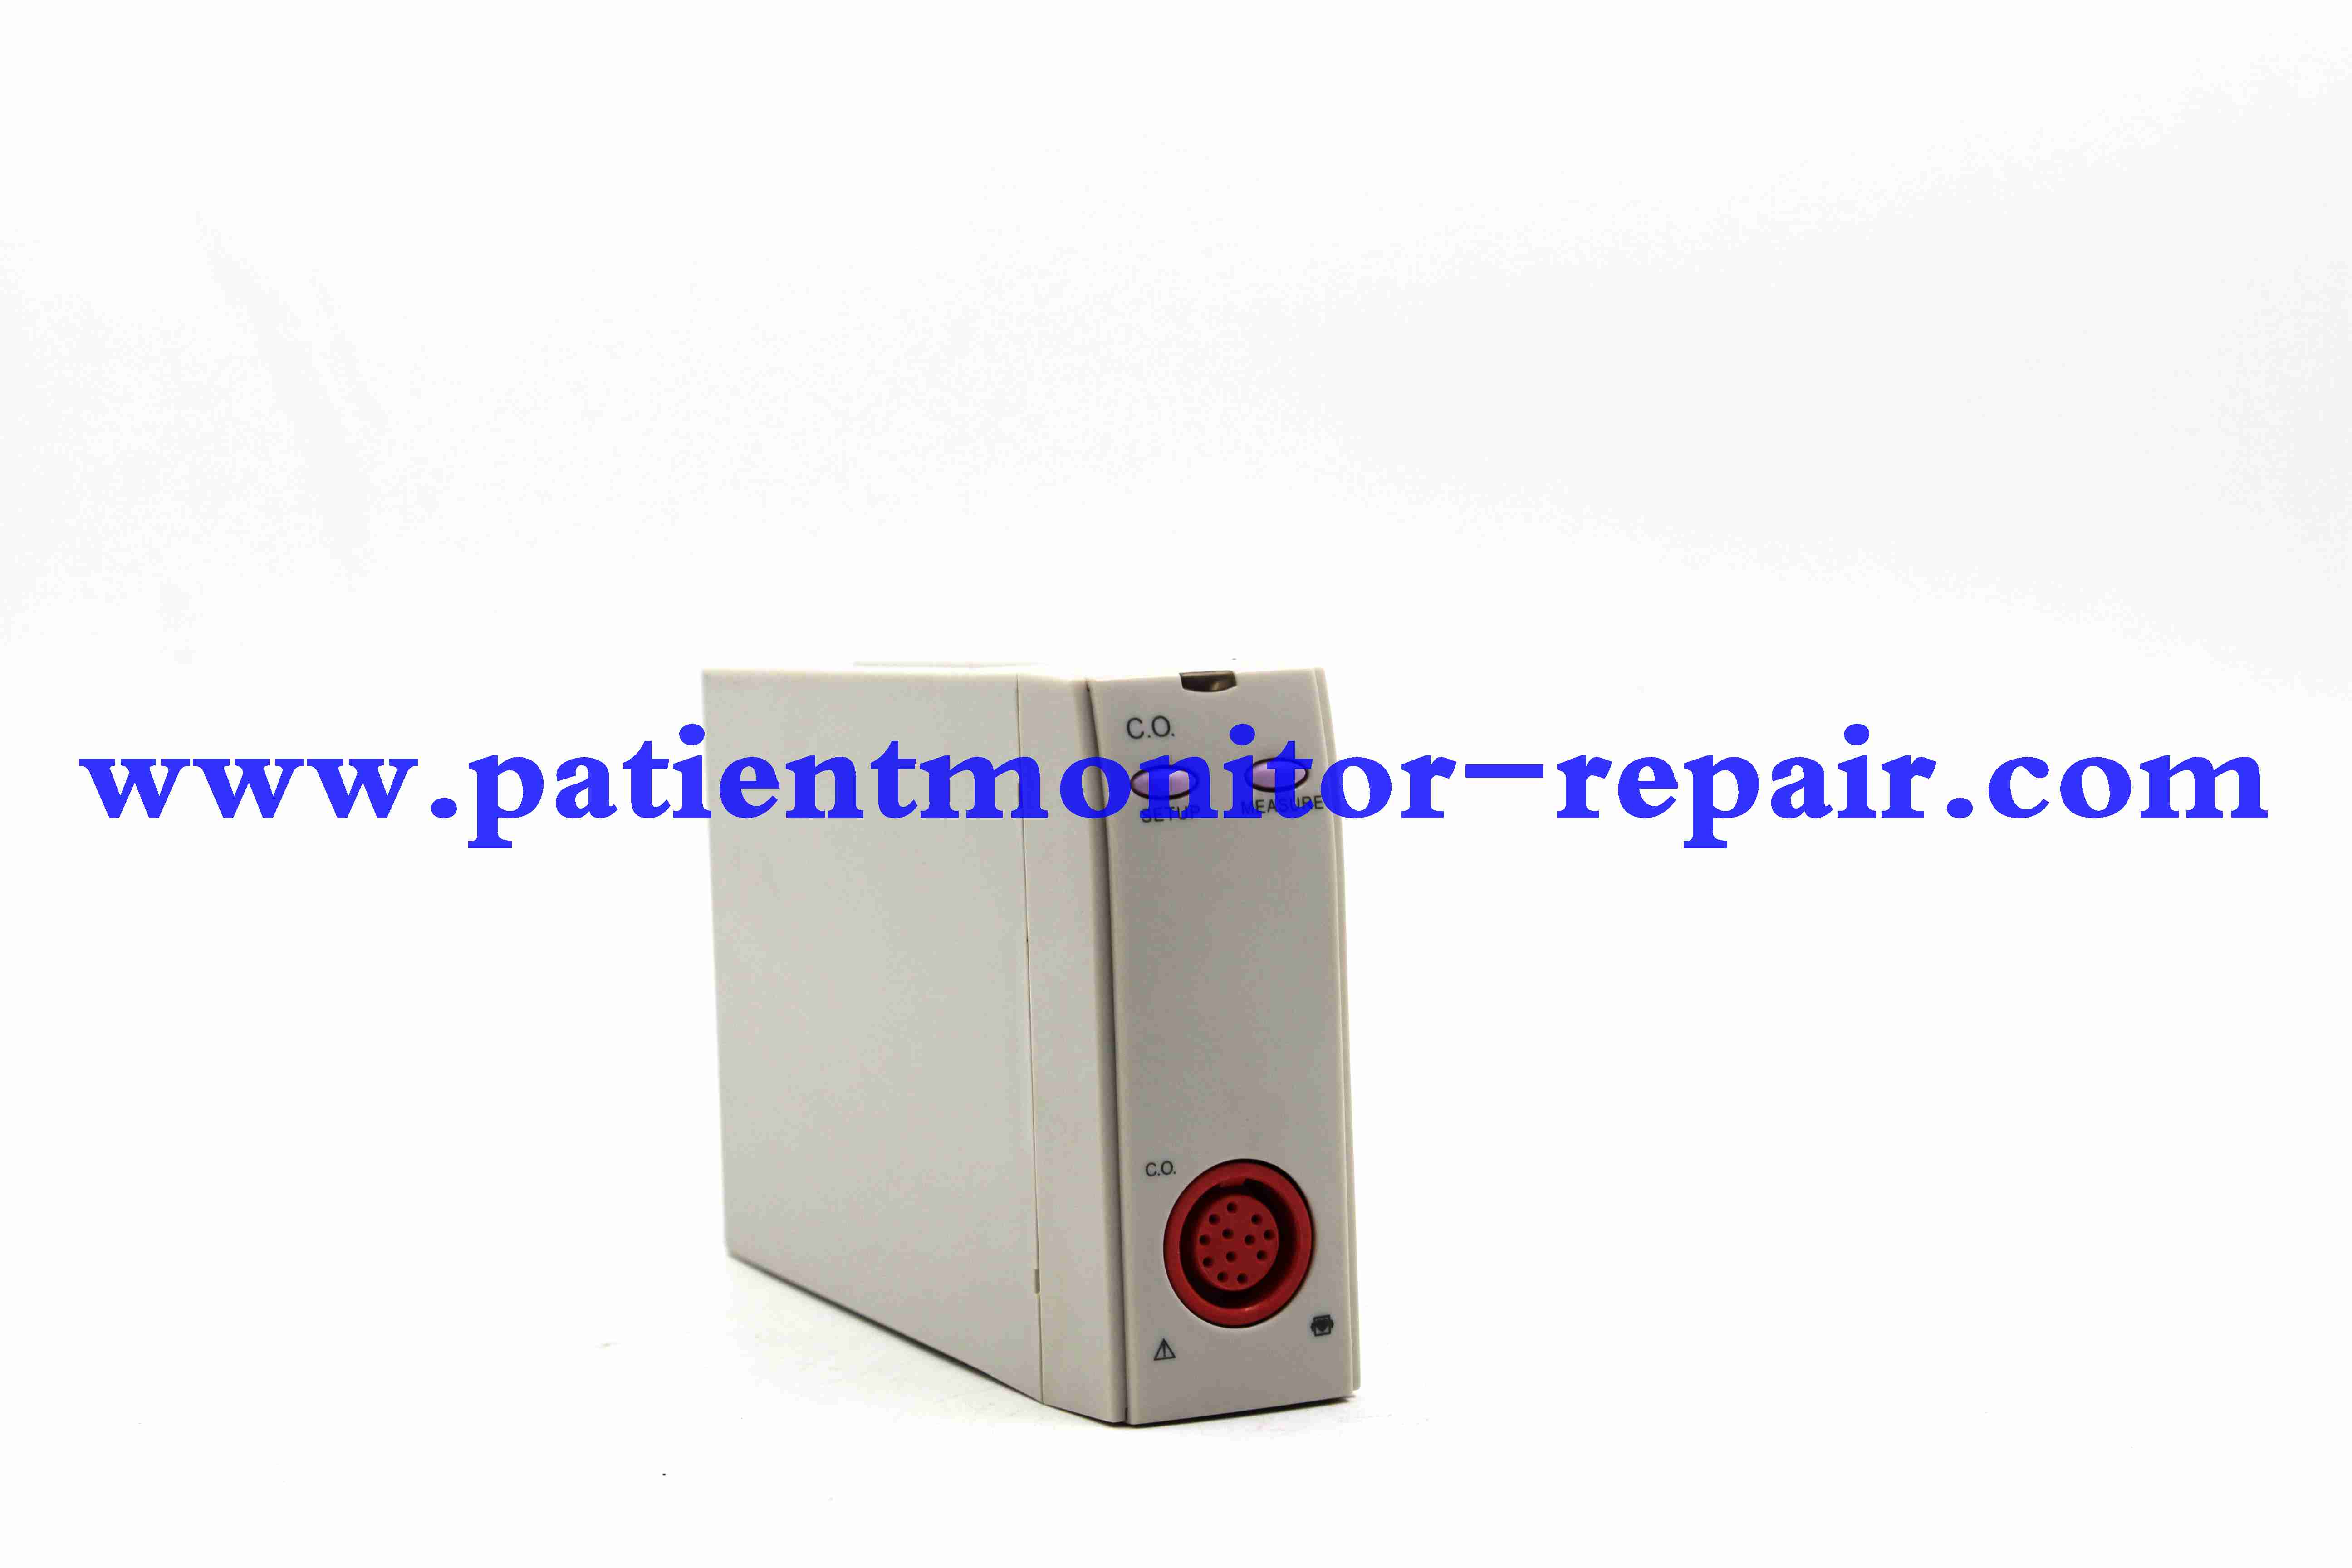 Mindray PM-6000 patient monitor C.O. module PN 6200-30-09700 